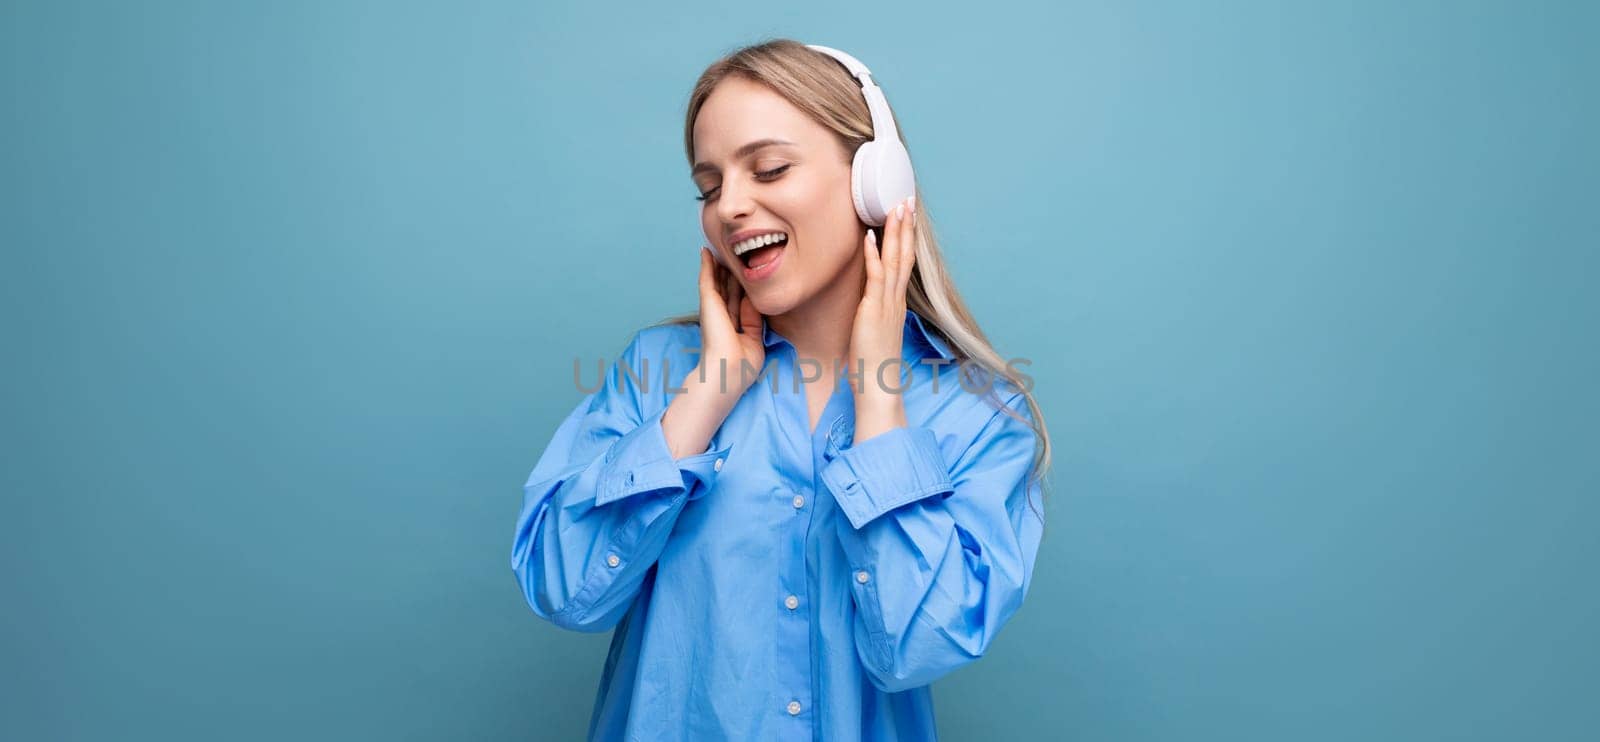 shy blonde girl in a casual shirt listens to songs in big headphones and sings along on a blue background with empty space.